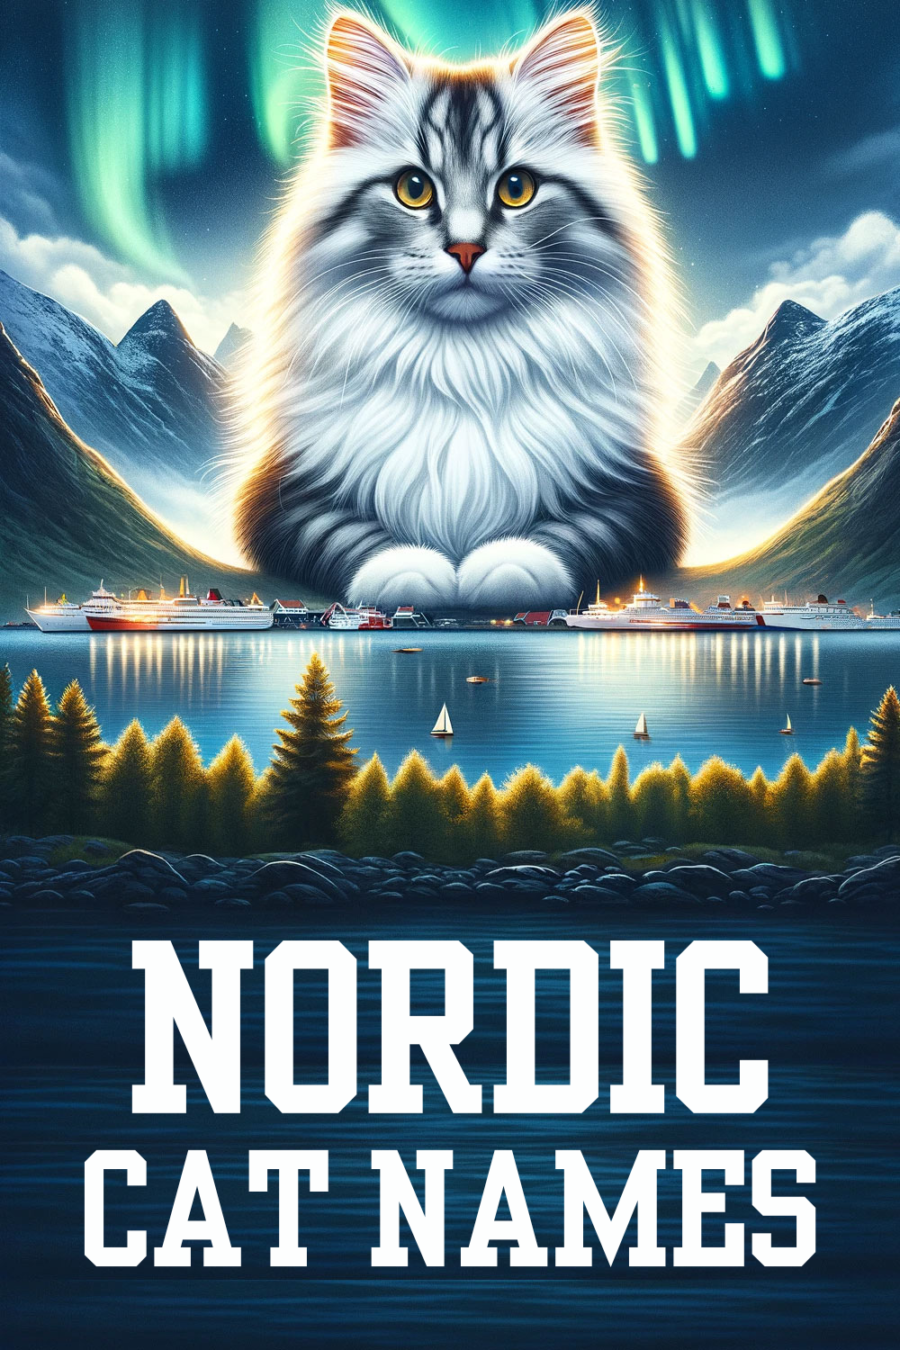 A Norwegian Forest cat prominently displayed in the foreground, appearing majestic and fluffy. The backdrop is a beautiful Nordic landscape with mountains, fjords, and a northern lights sky.